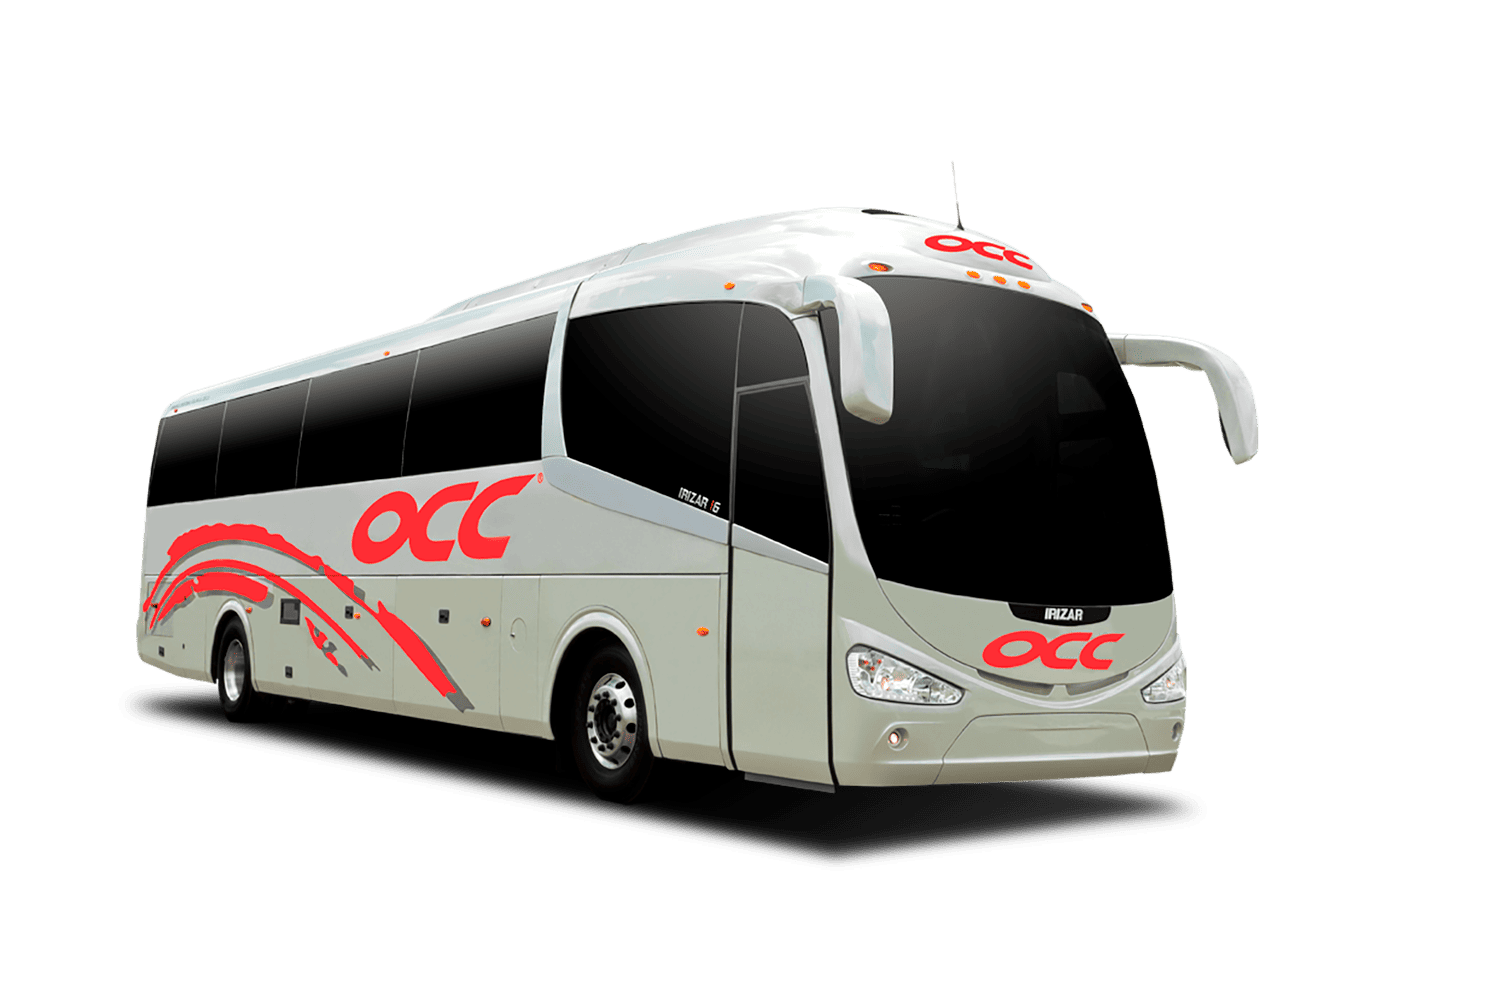 How To Get From Playa del Carmen To Palenque By Bus - All Possible Ways, cheapest way from Playa del Carmen to Palenque, Playa del Carmen to Palenque, ado bus from Playa del Carmen to Palenque, occ bus from Playa del Carmen to Palenque, AU autobuses unidos from Playa del Carmen to Palenque, shared van from Playa del Carmen to Palenque, Colectivo from Playa del Carmen to Palenque, Uber from Playa del Carmen to Palenque, taxi from Playa del Carmen to Palenque